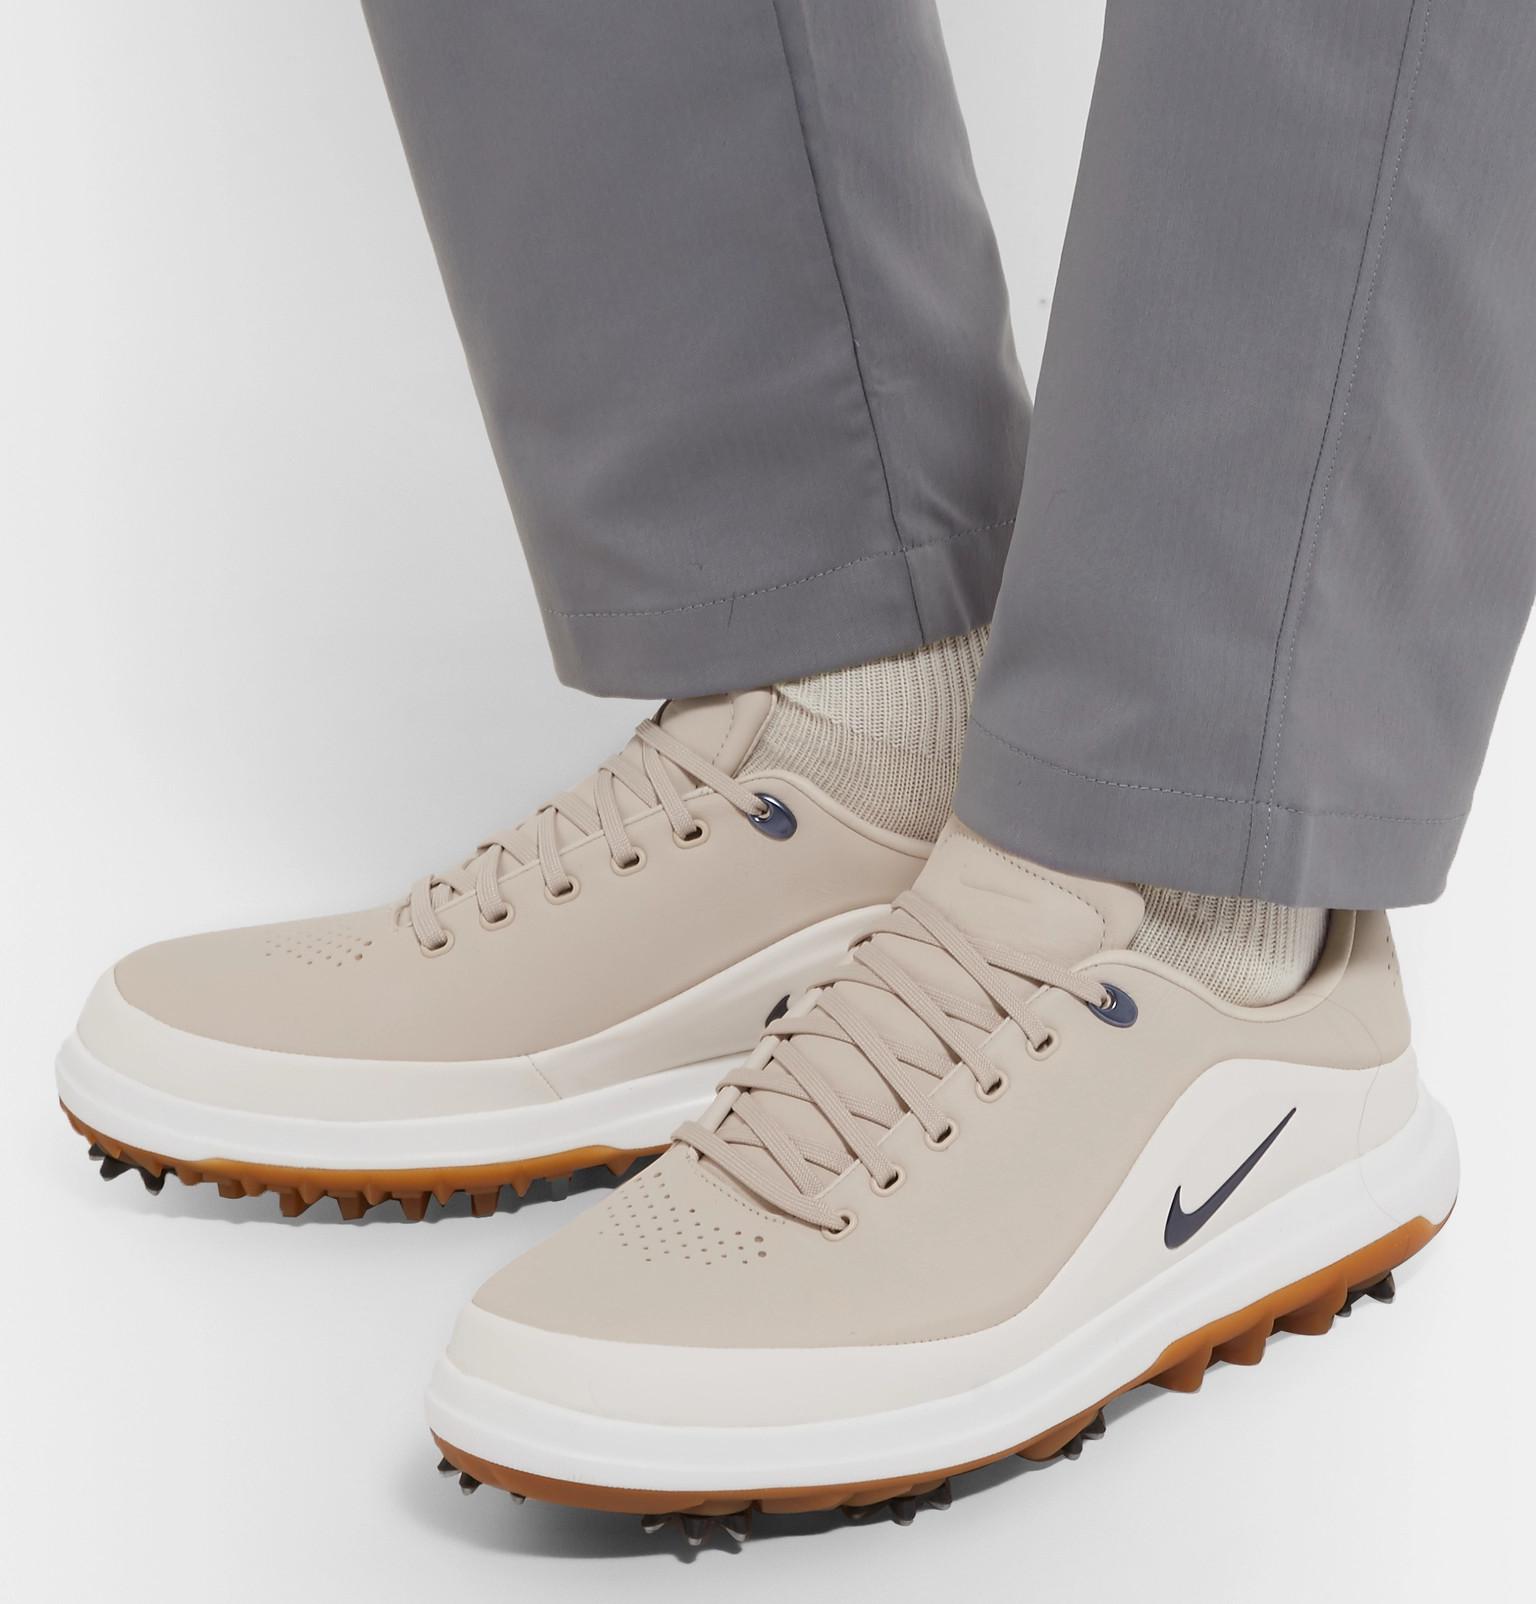 Nike Air Zoom Precision Leather Golf Shoes in White for Men - Lyst